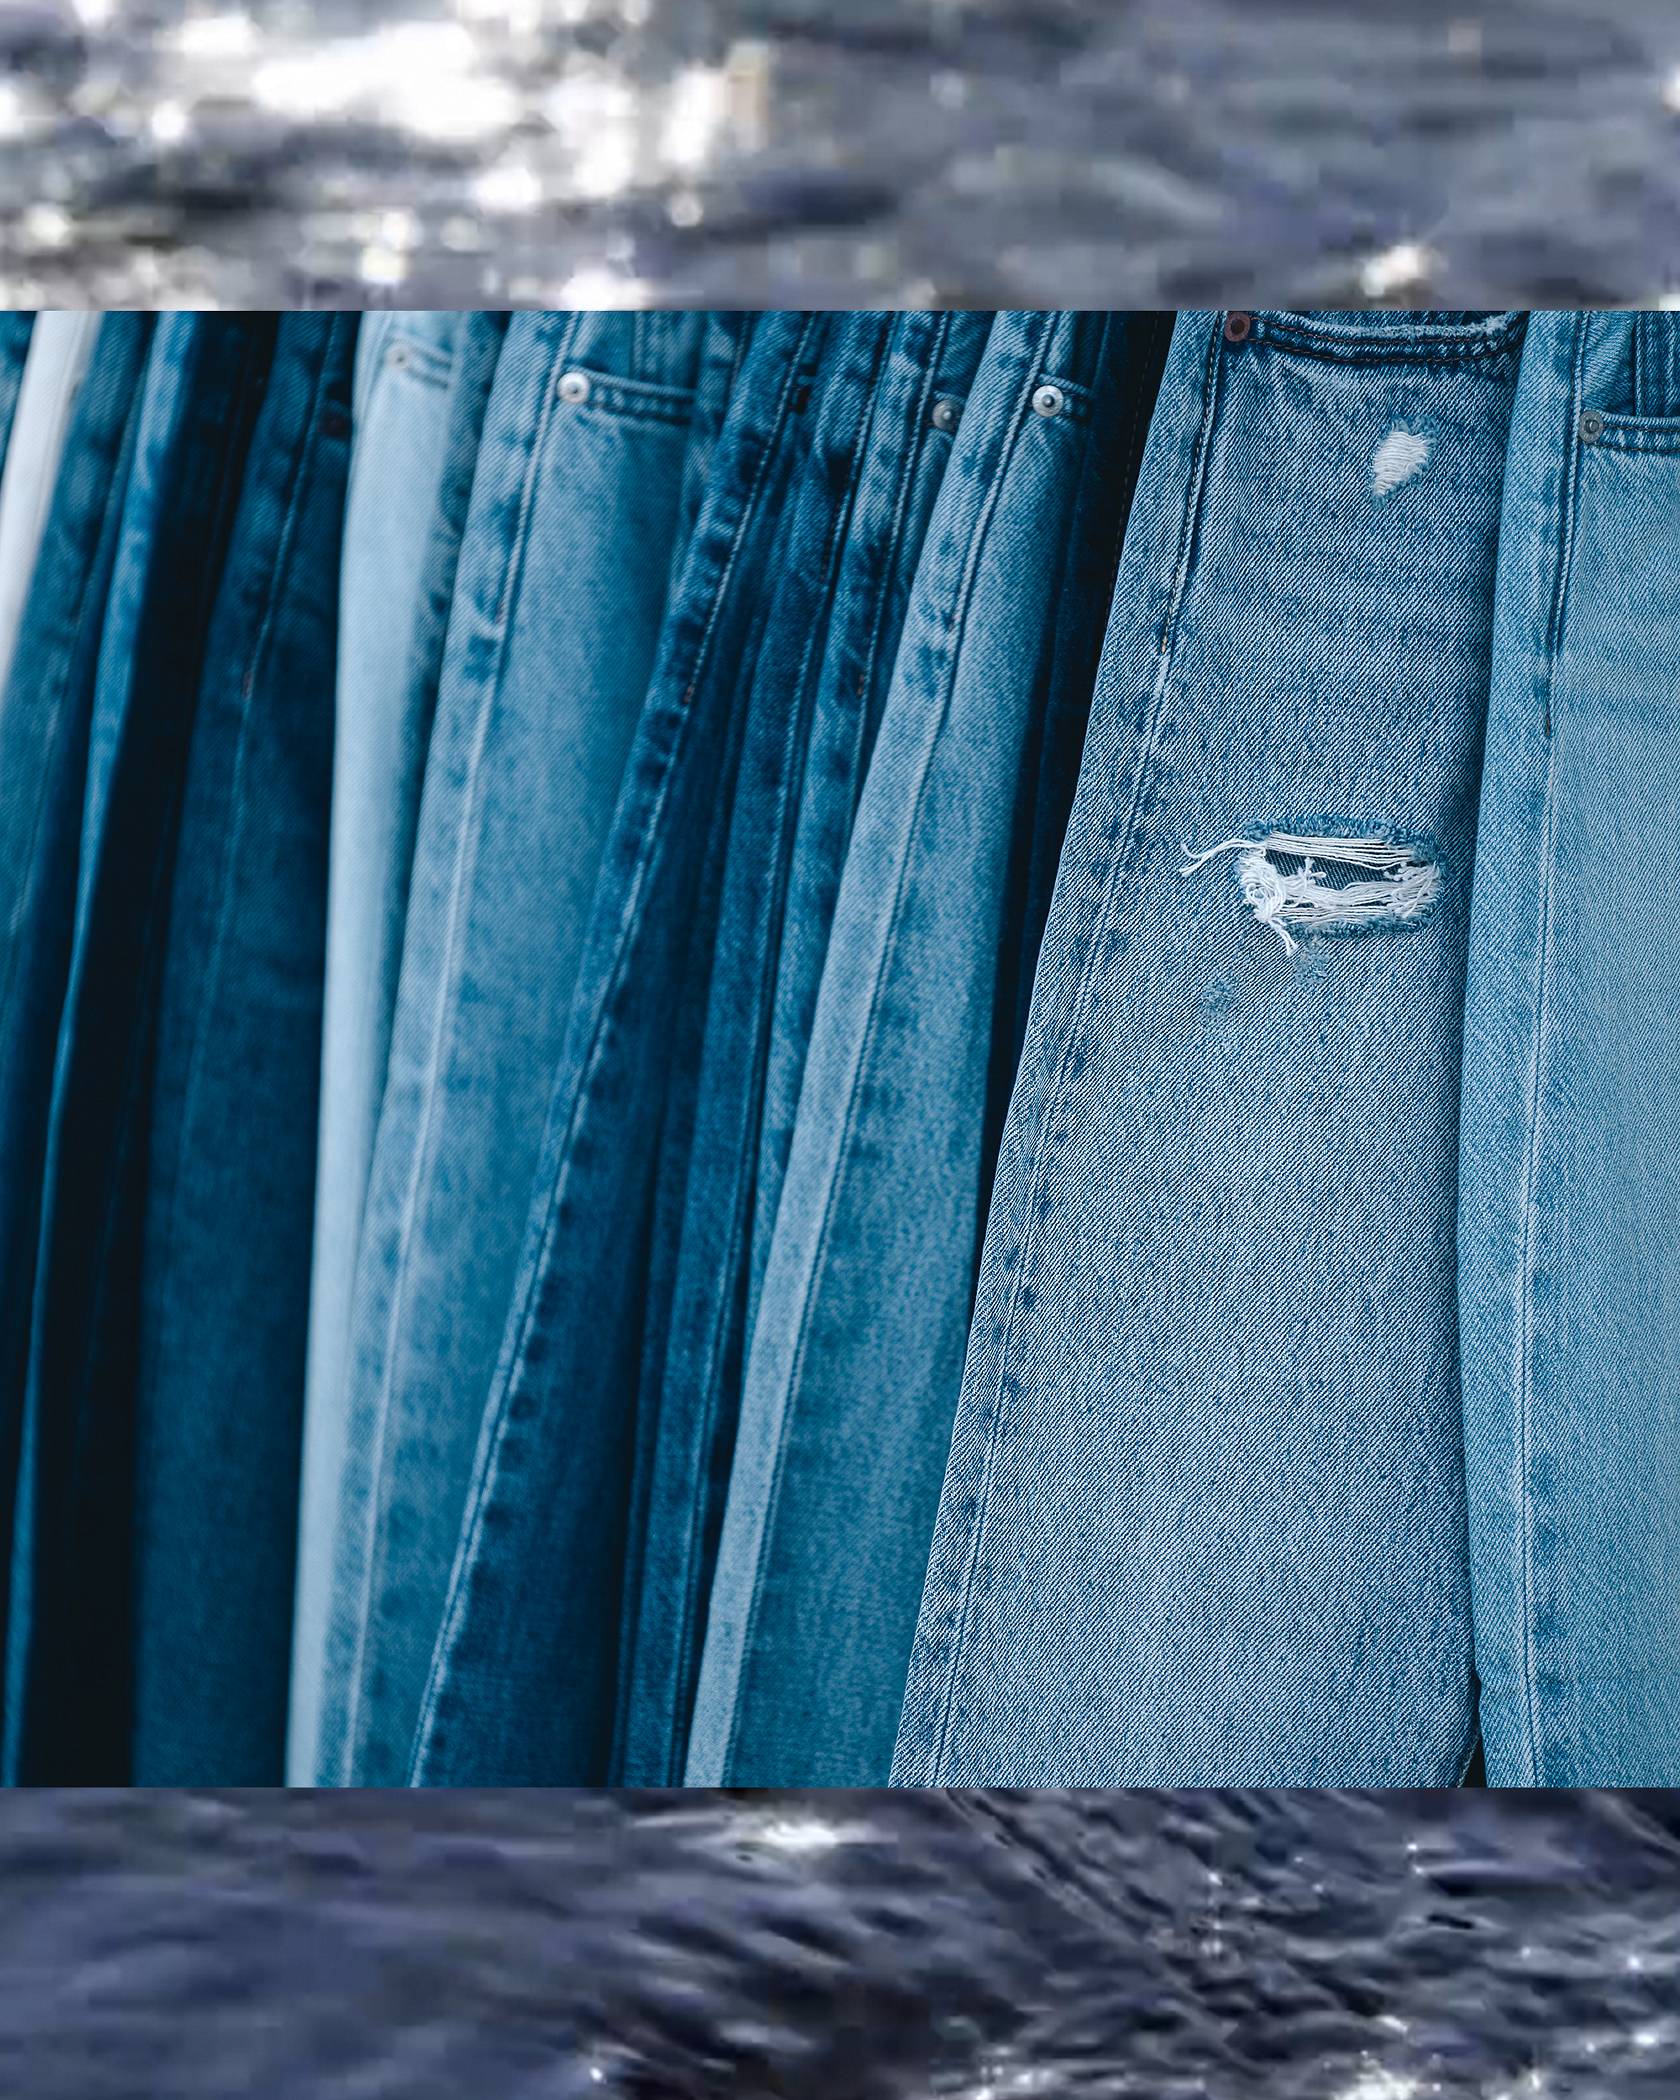 Photo of blue jeans overlaid against an image of the ocean.